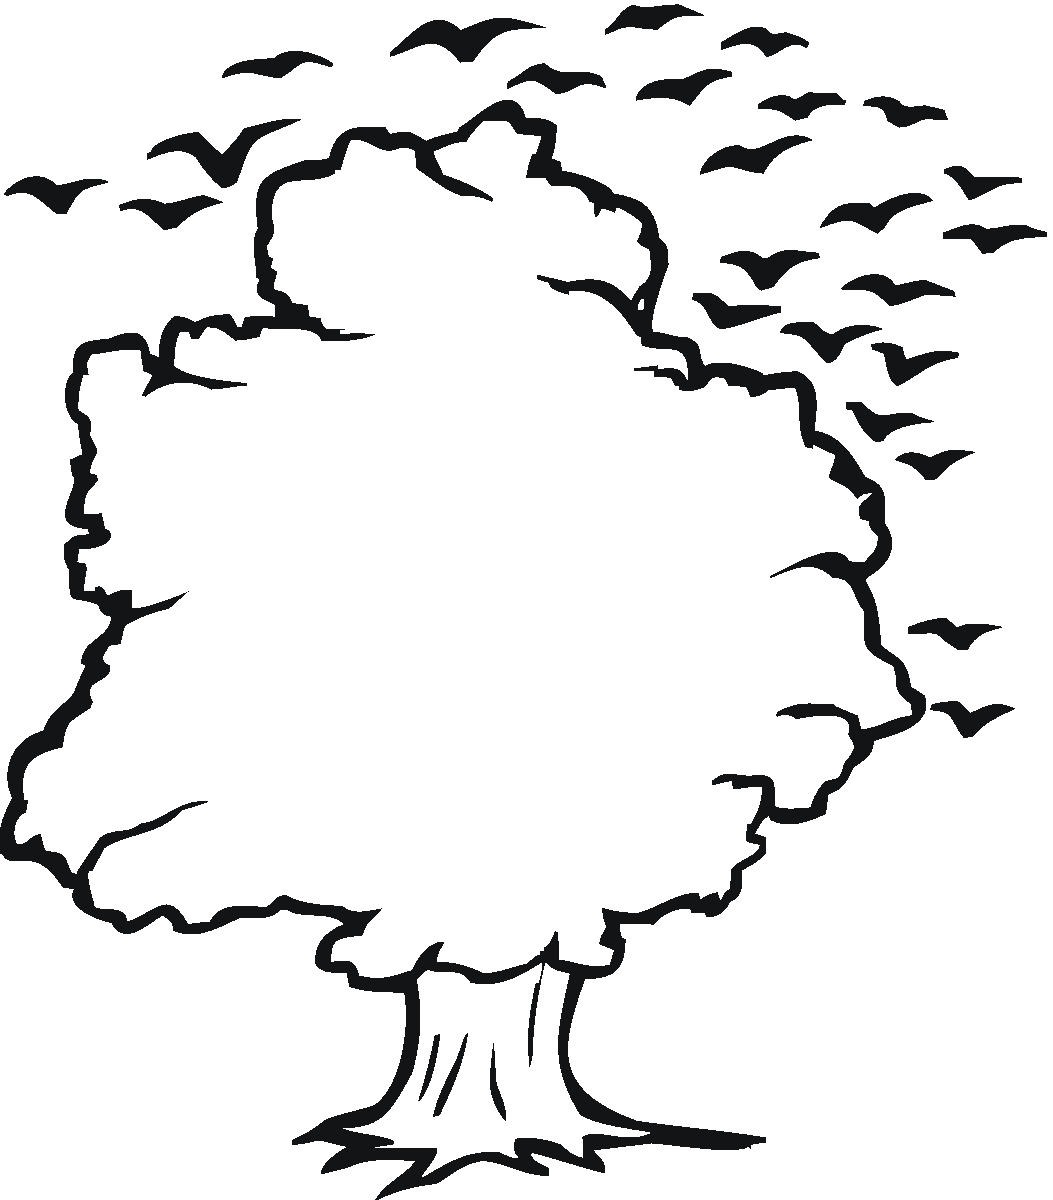 Tree outline coloring page - Coloring Pages & Pictures - IMAGIXS ...